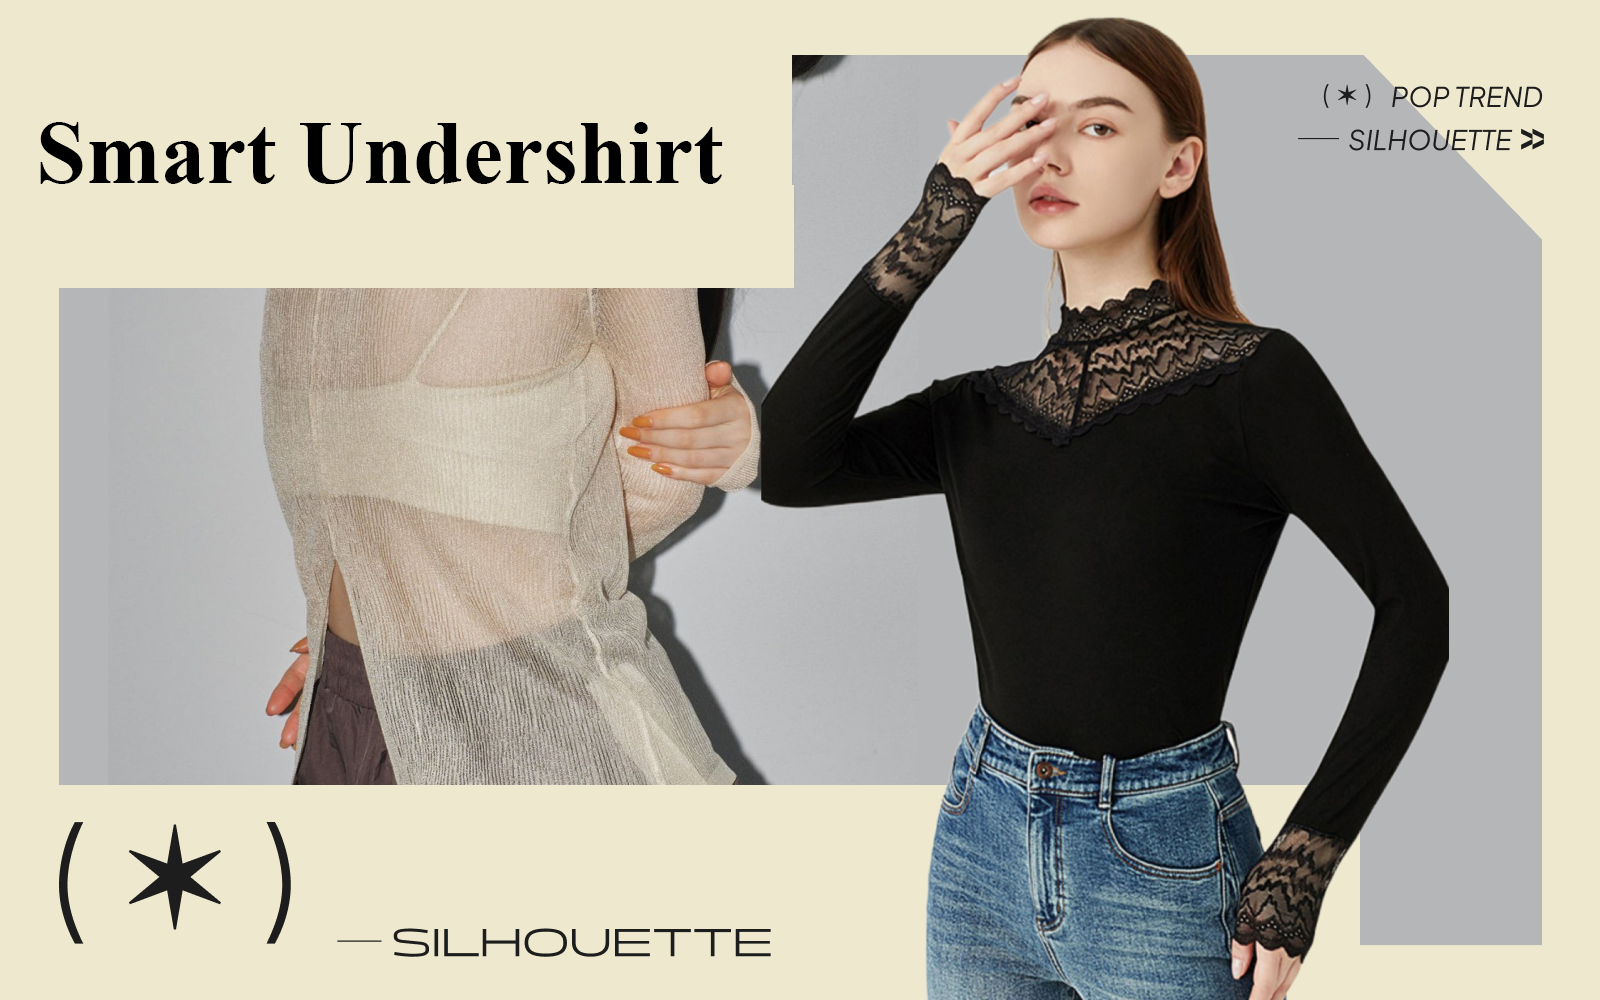 Fashionable Undershirt -- The Silhouette Trend for Women's Undershirt